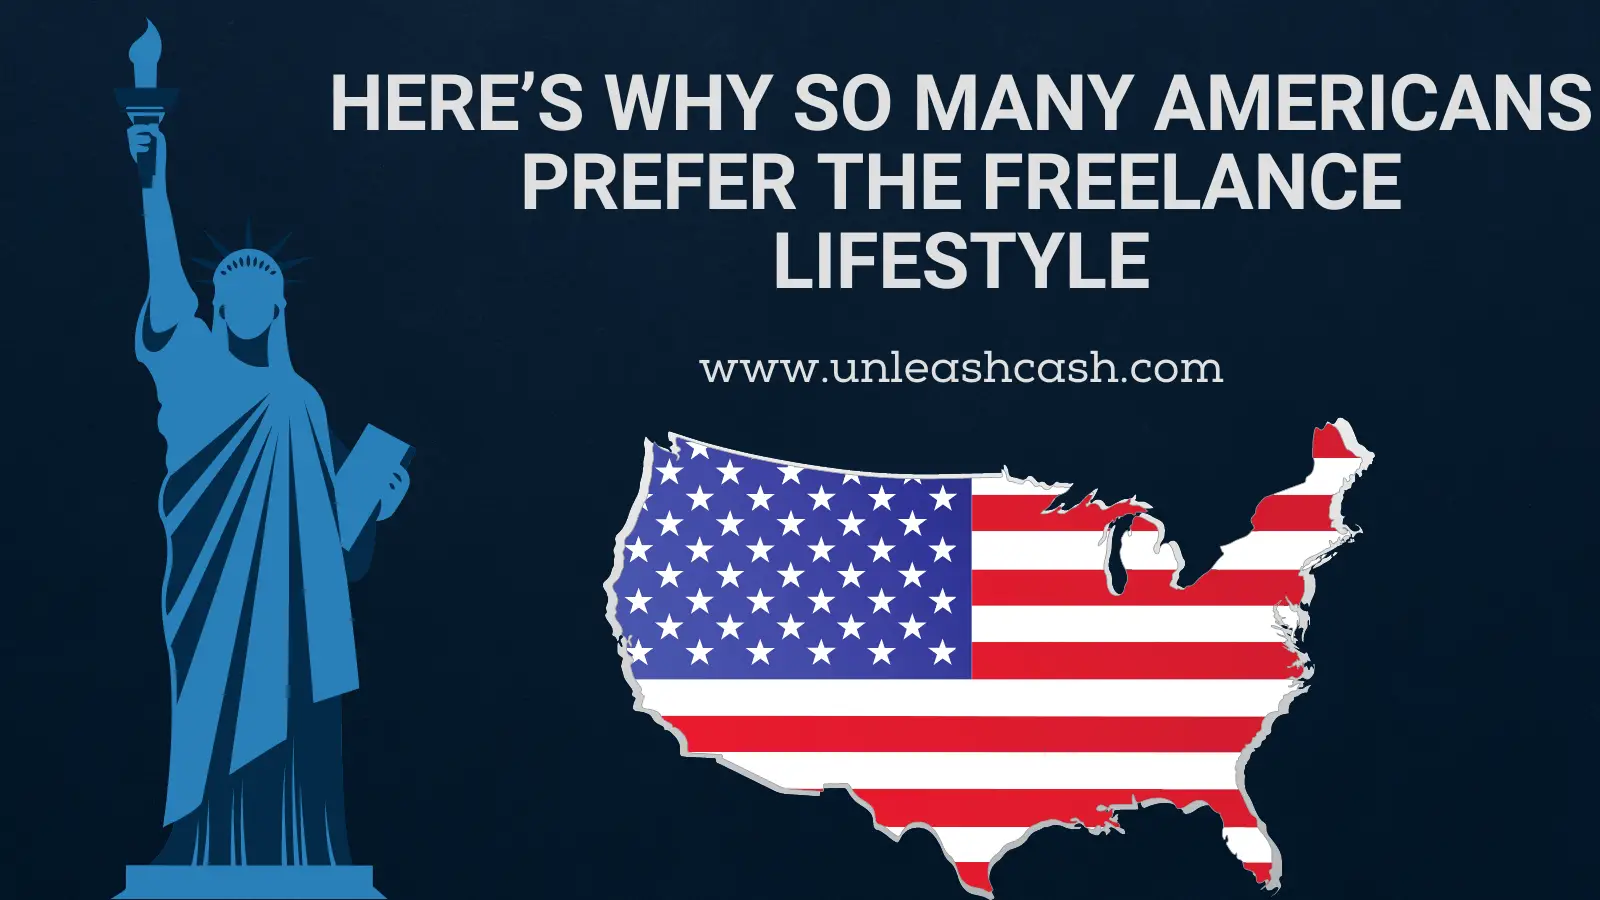 Here’s Why So Many Americans Prefer the Freelance Lifestyle